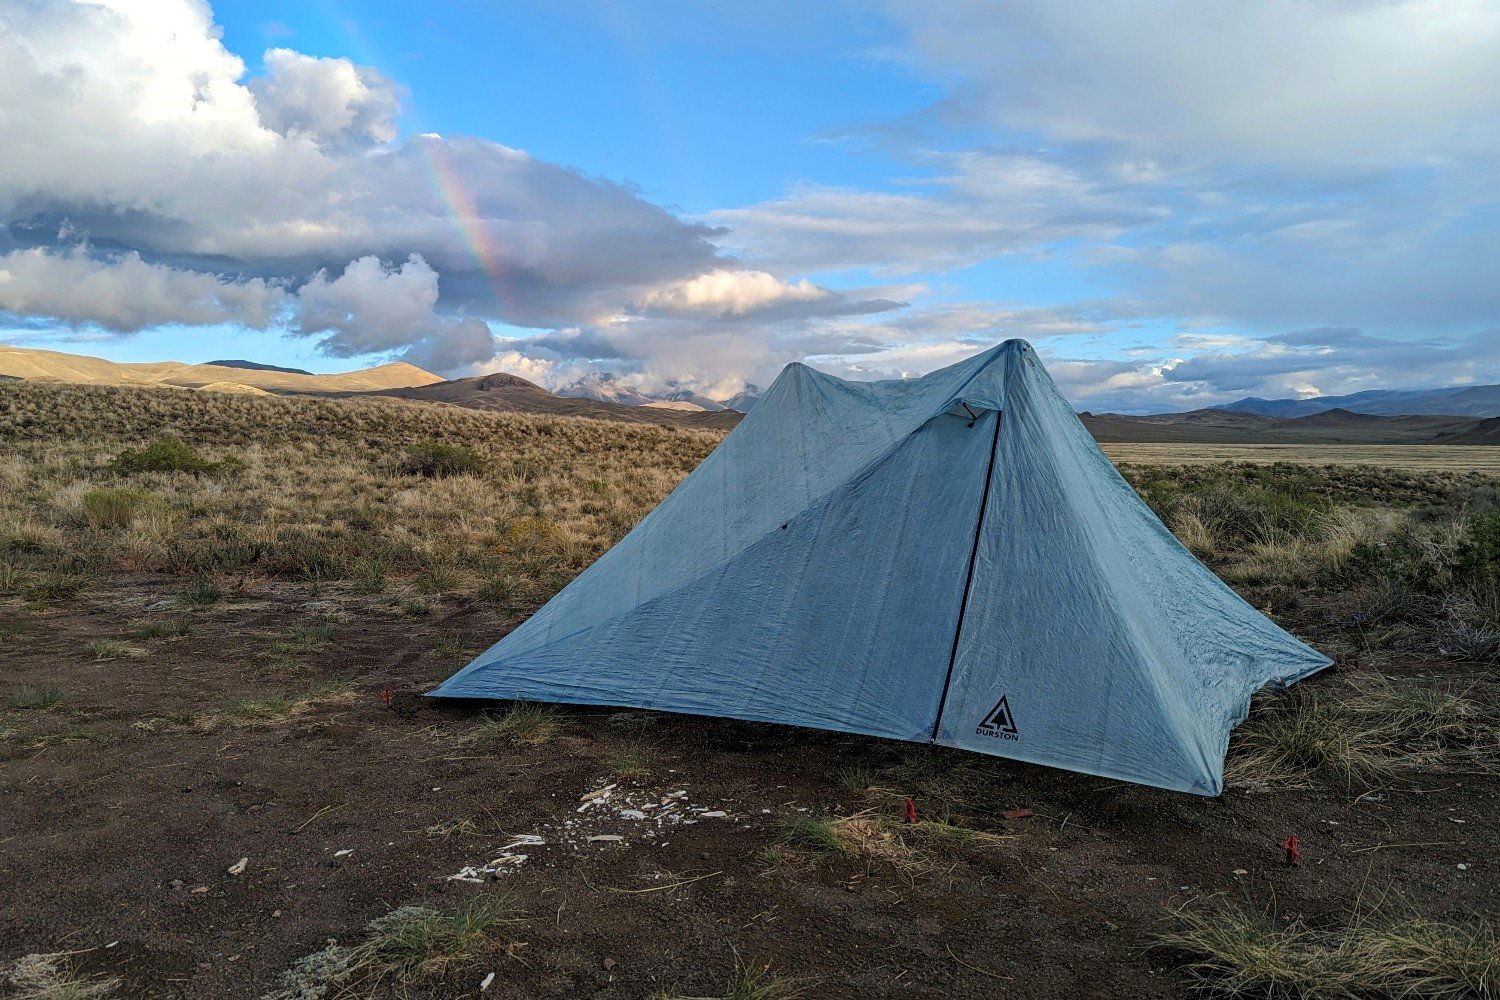 The Durston X-Mid 2 Pro tent set up in a desert campsite with mountains in the background. There are some rain clouds and a rainbow in the background